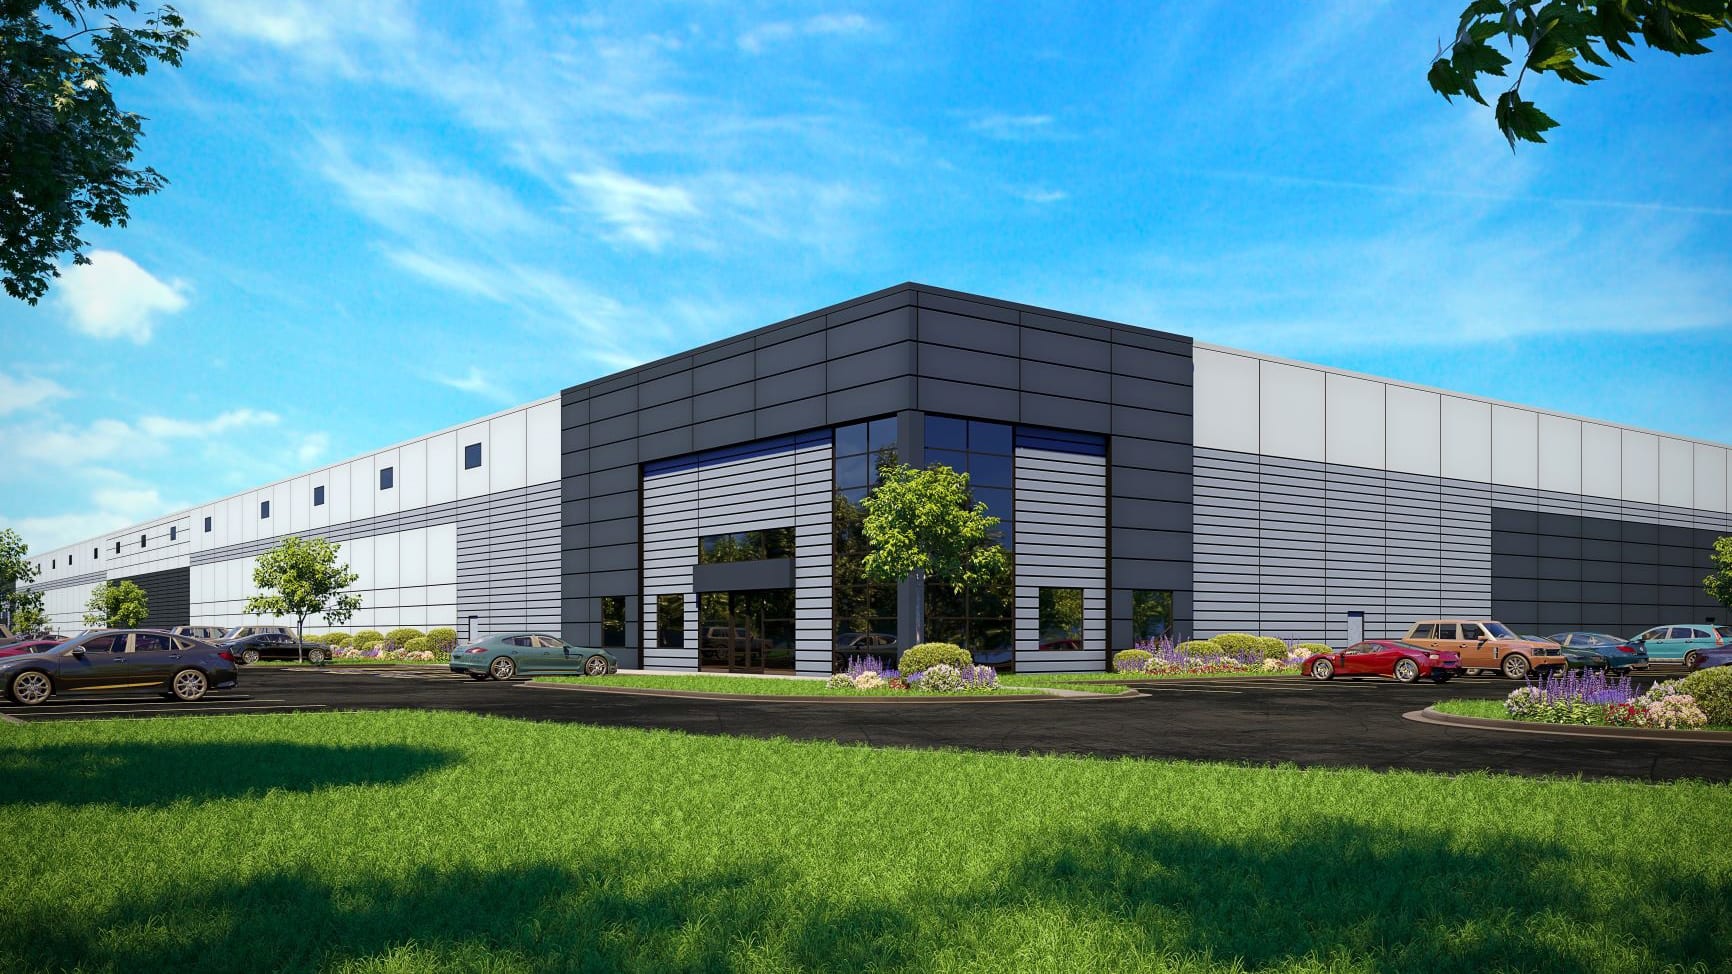 PREMIER Design + Build Group completes warehouse project in DuPage County for Sterling Bay